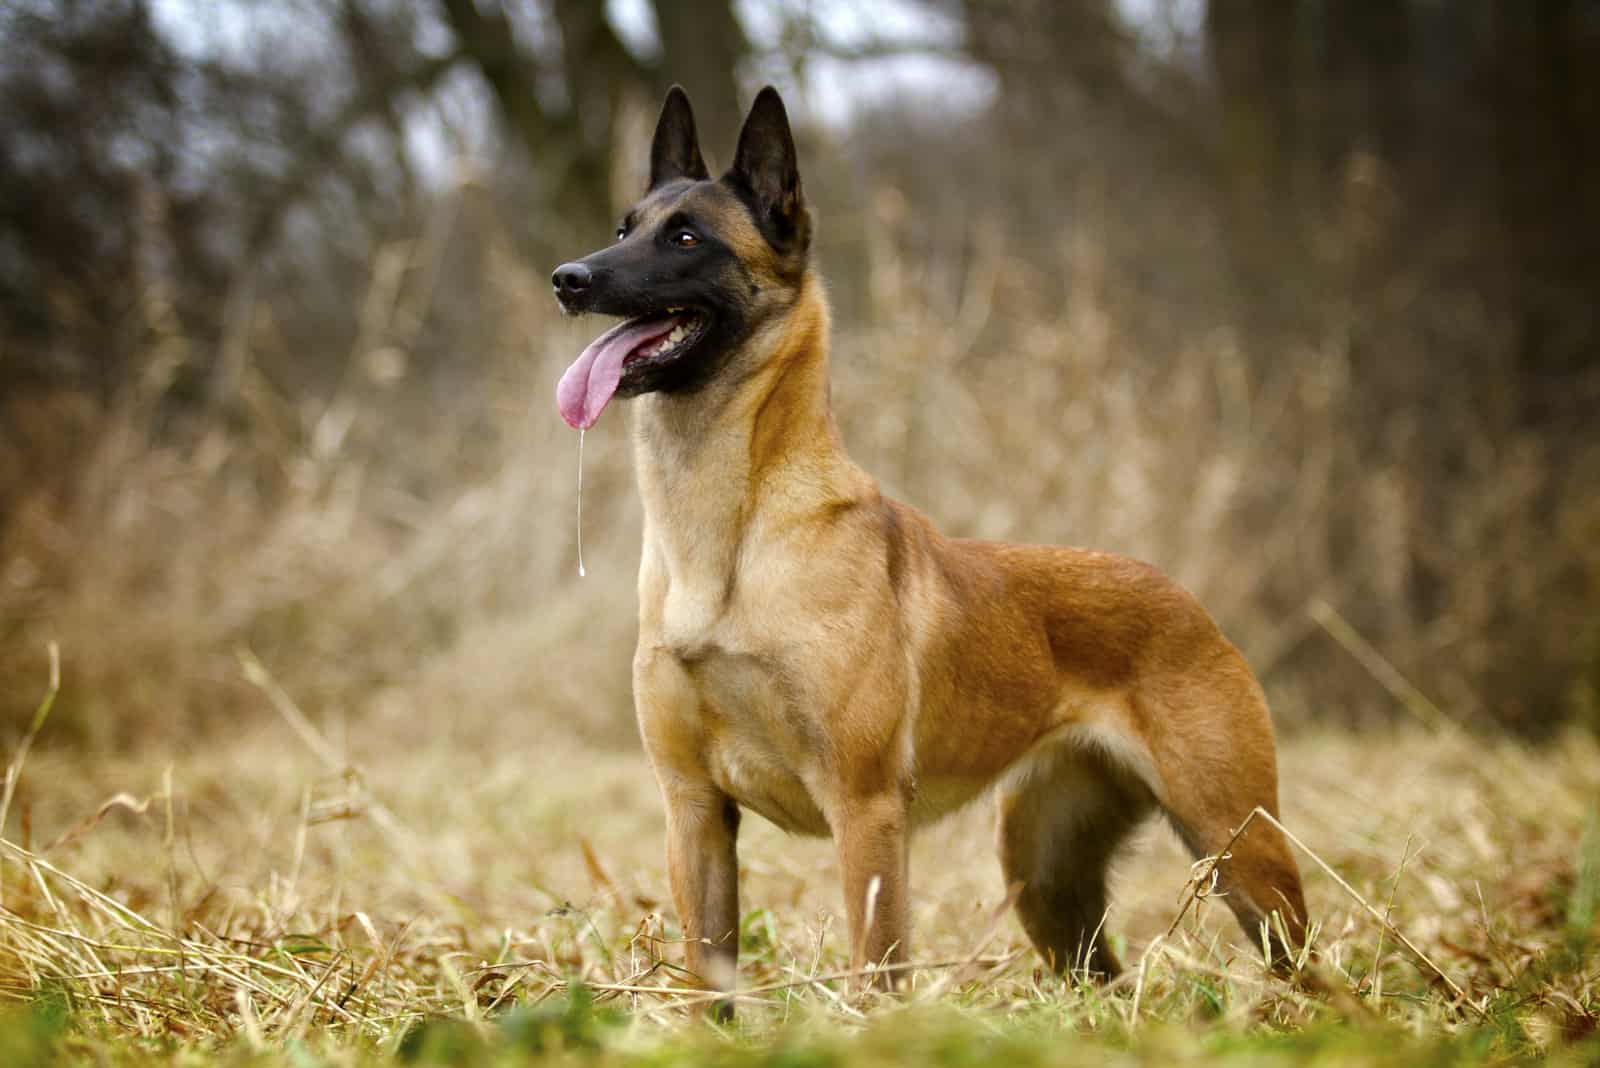 All Belgian Malinois Colors Explained - What Colors Are Up To The Breed Standard?